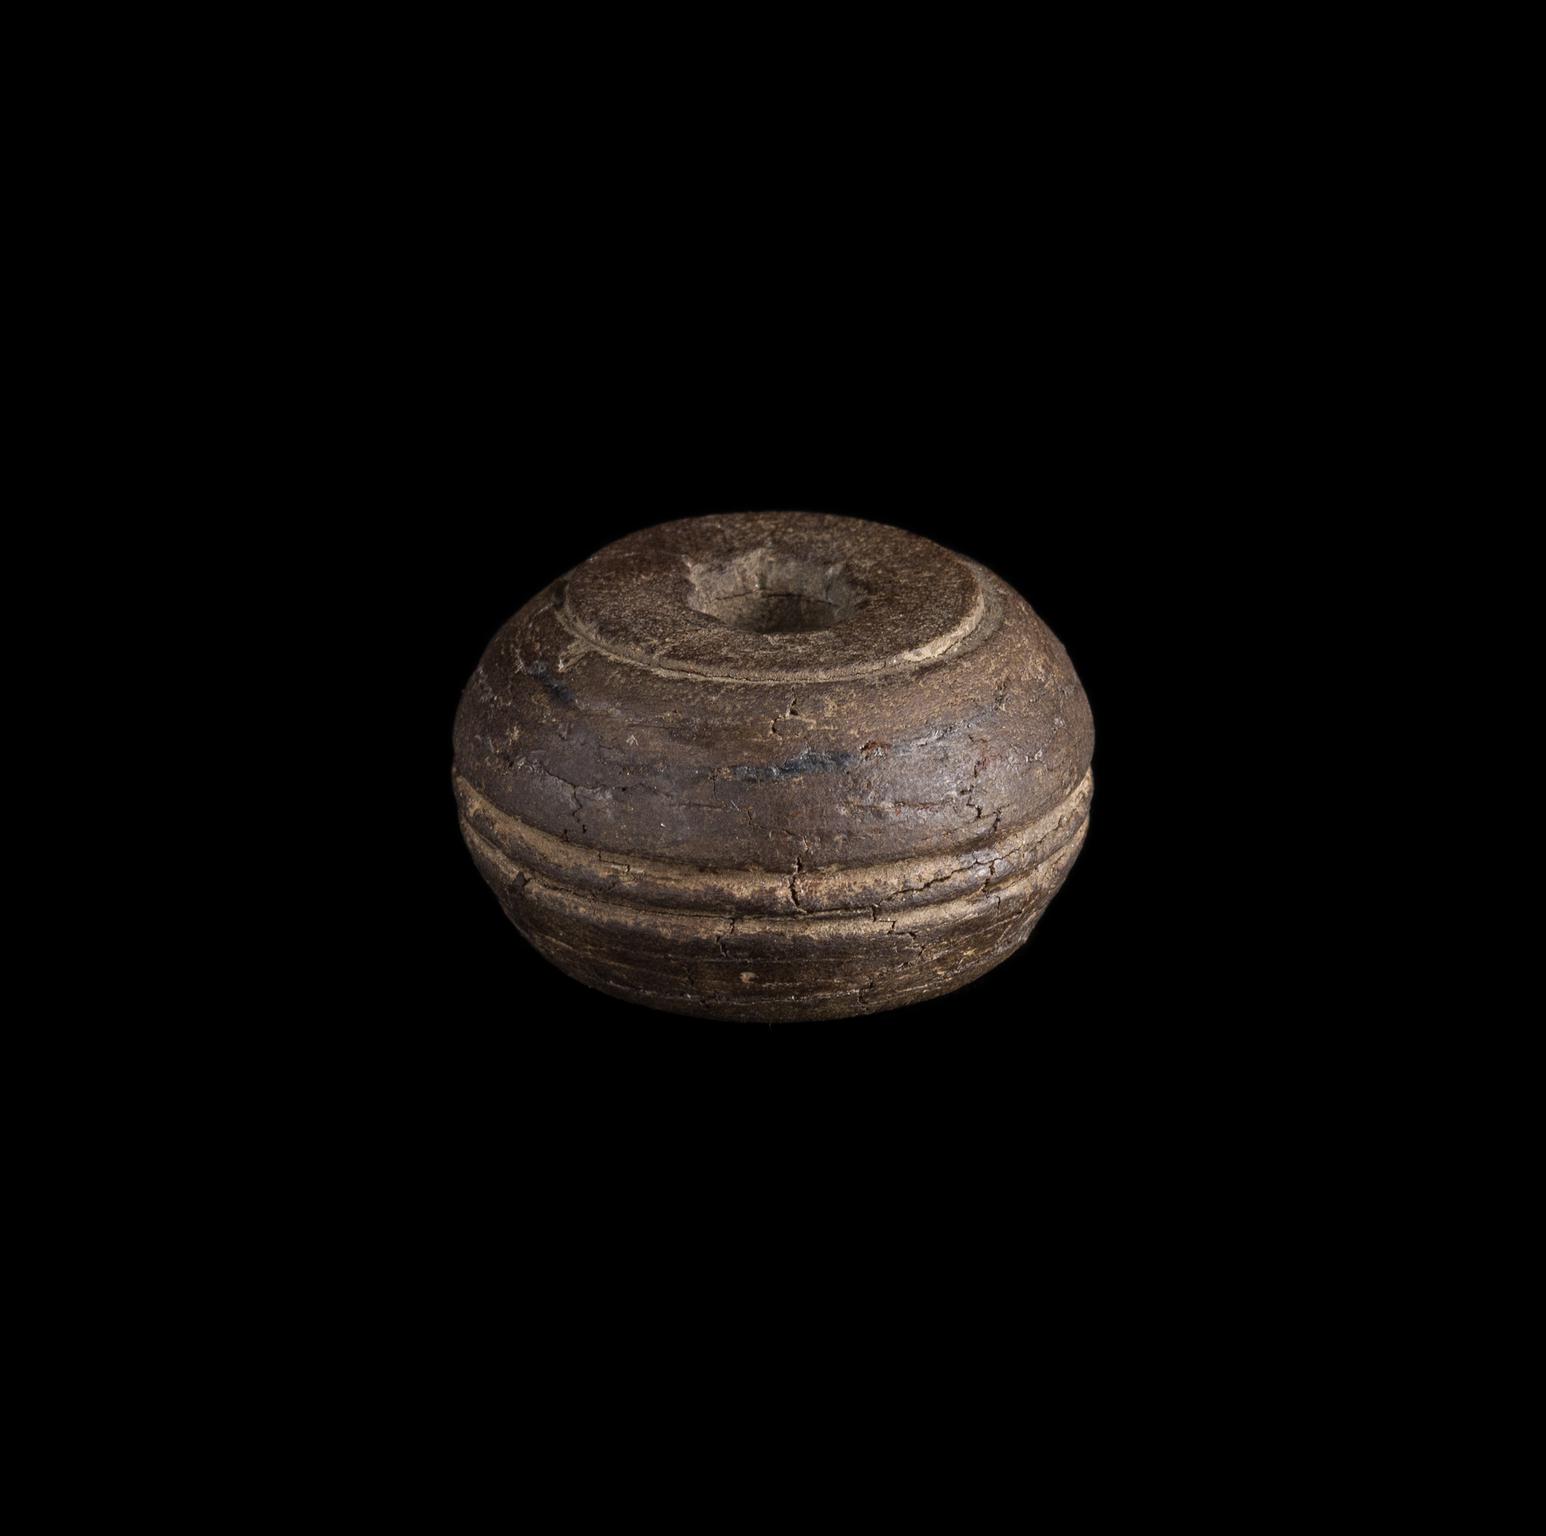 Roman shale spindle whorl